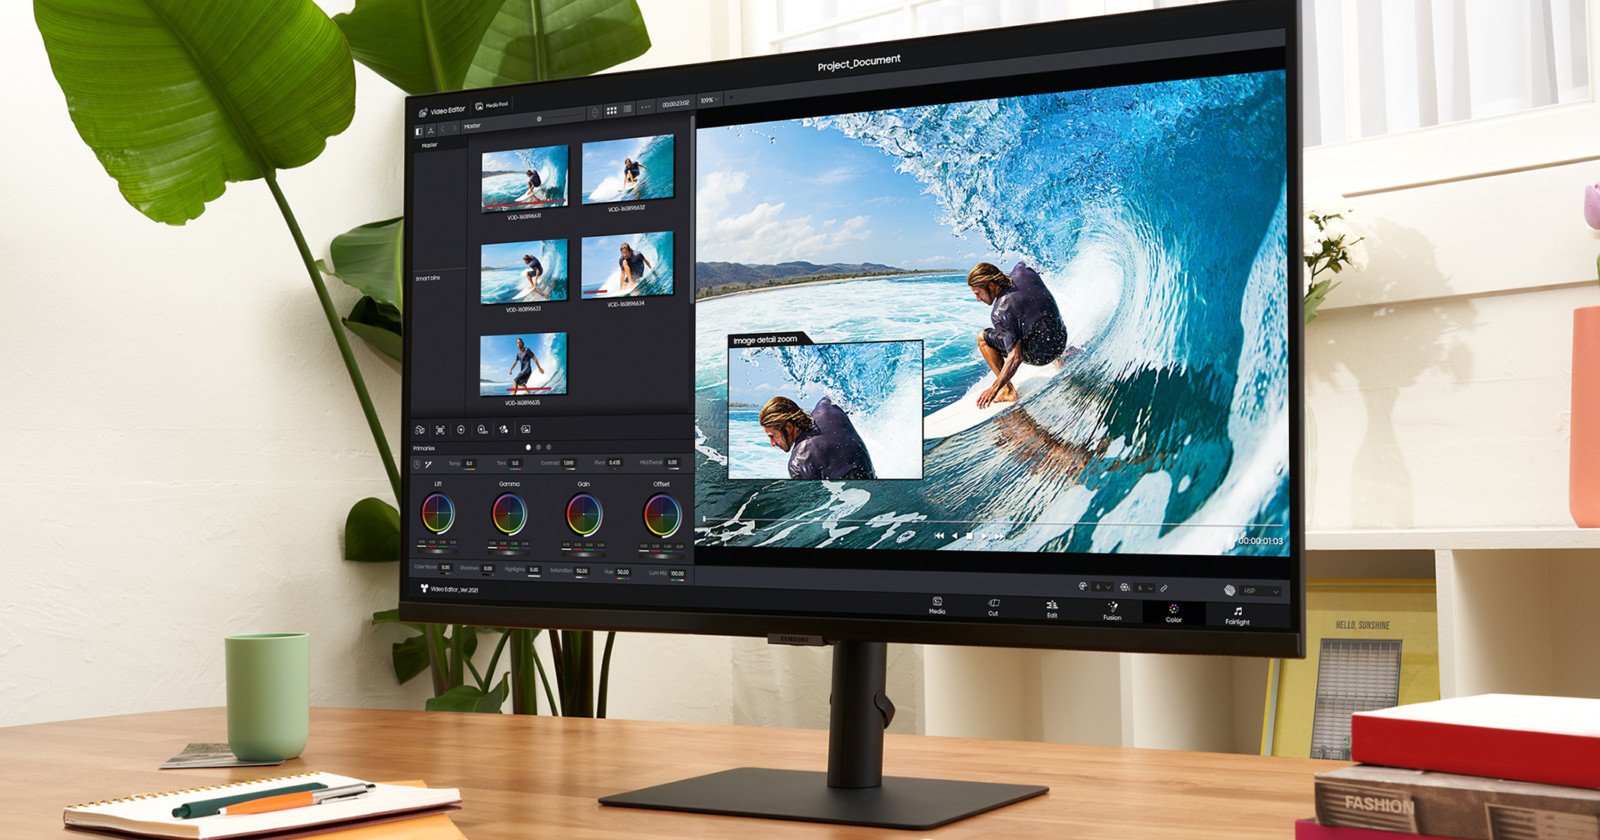 Samsung’s ViewFinity S8 is a Creator-Focused, Color-Accurate 4K Monitor